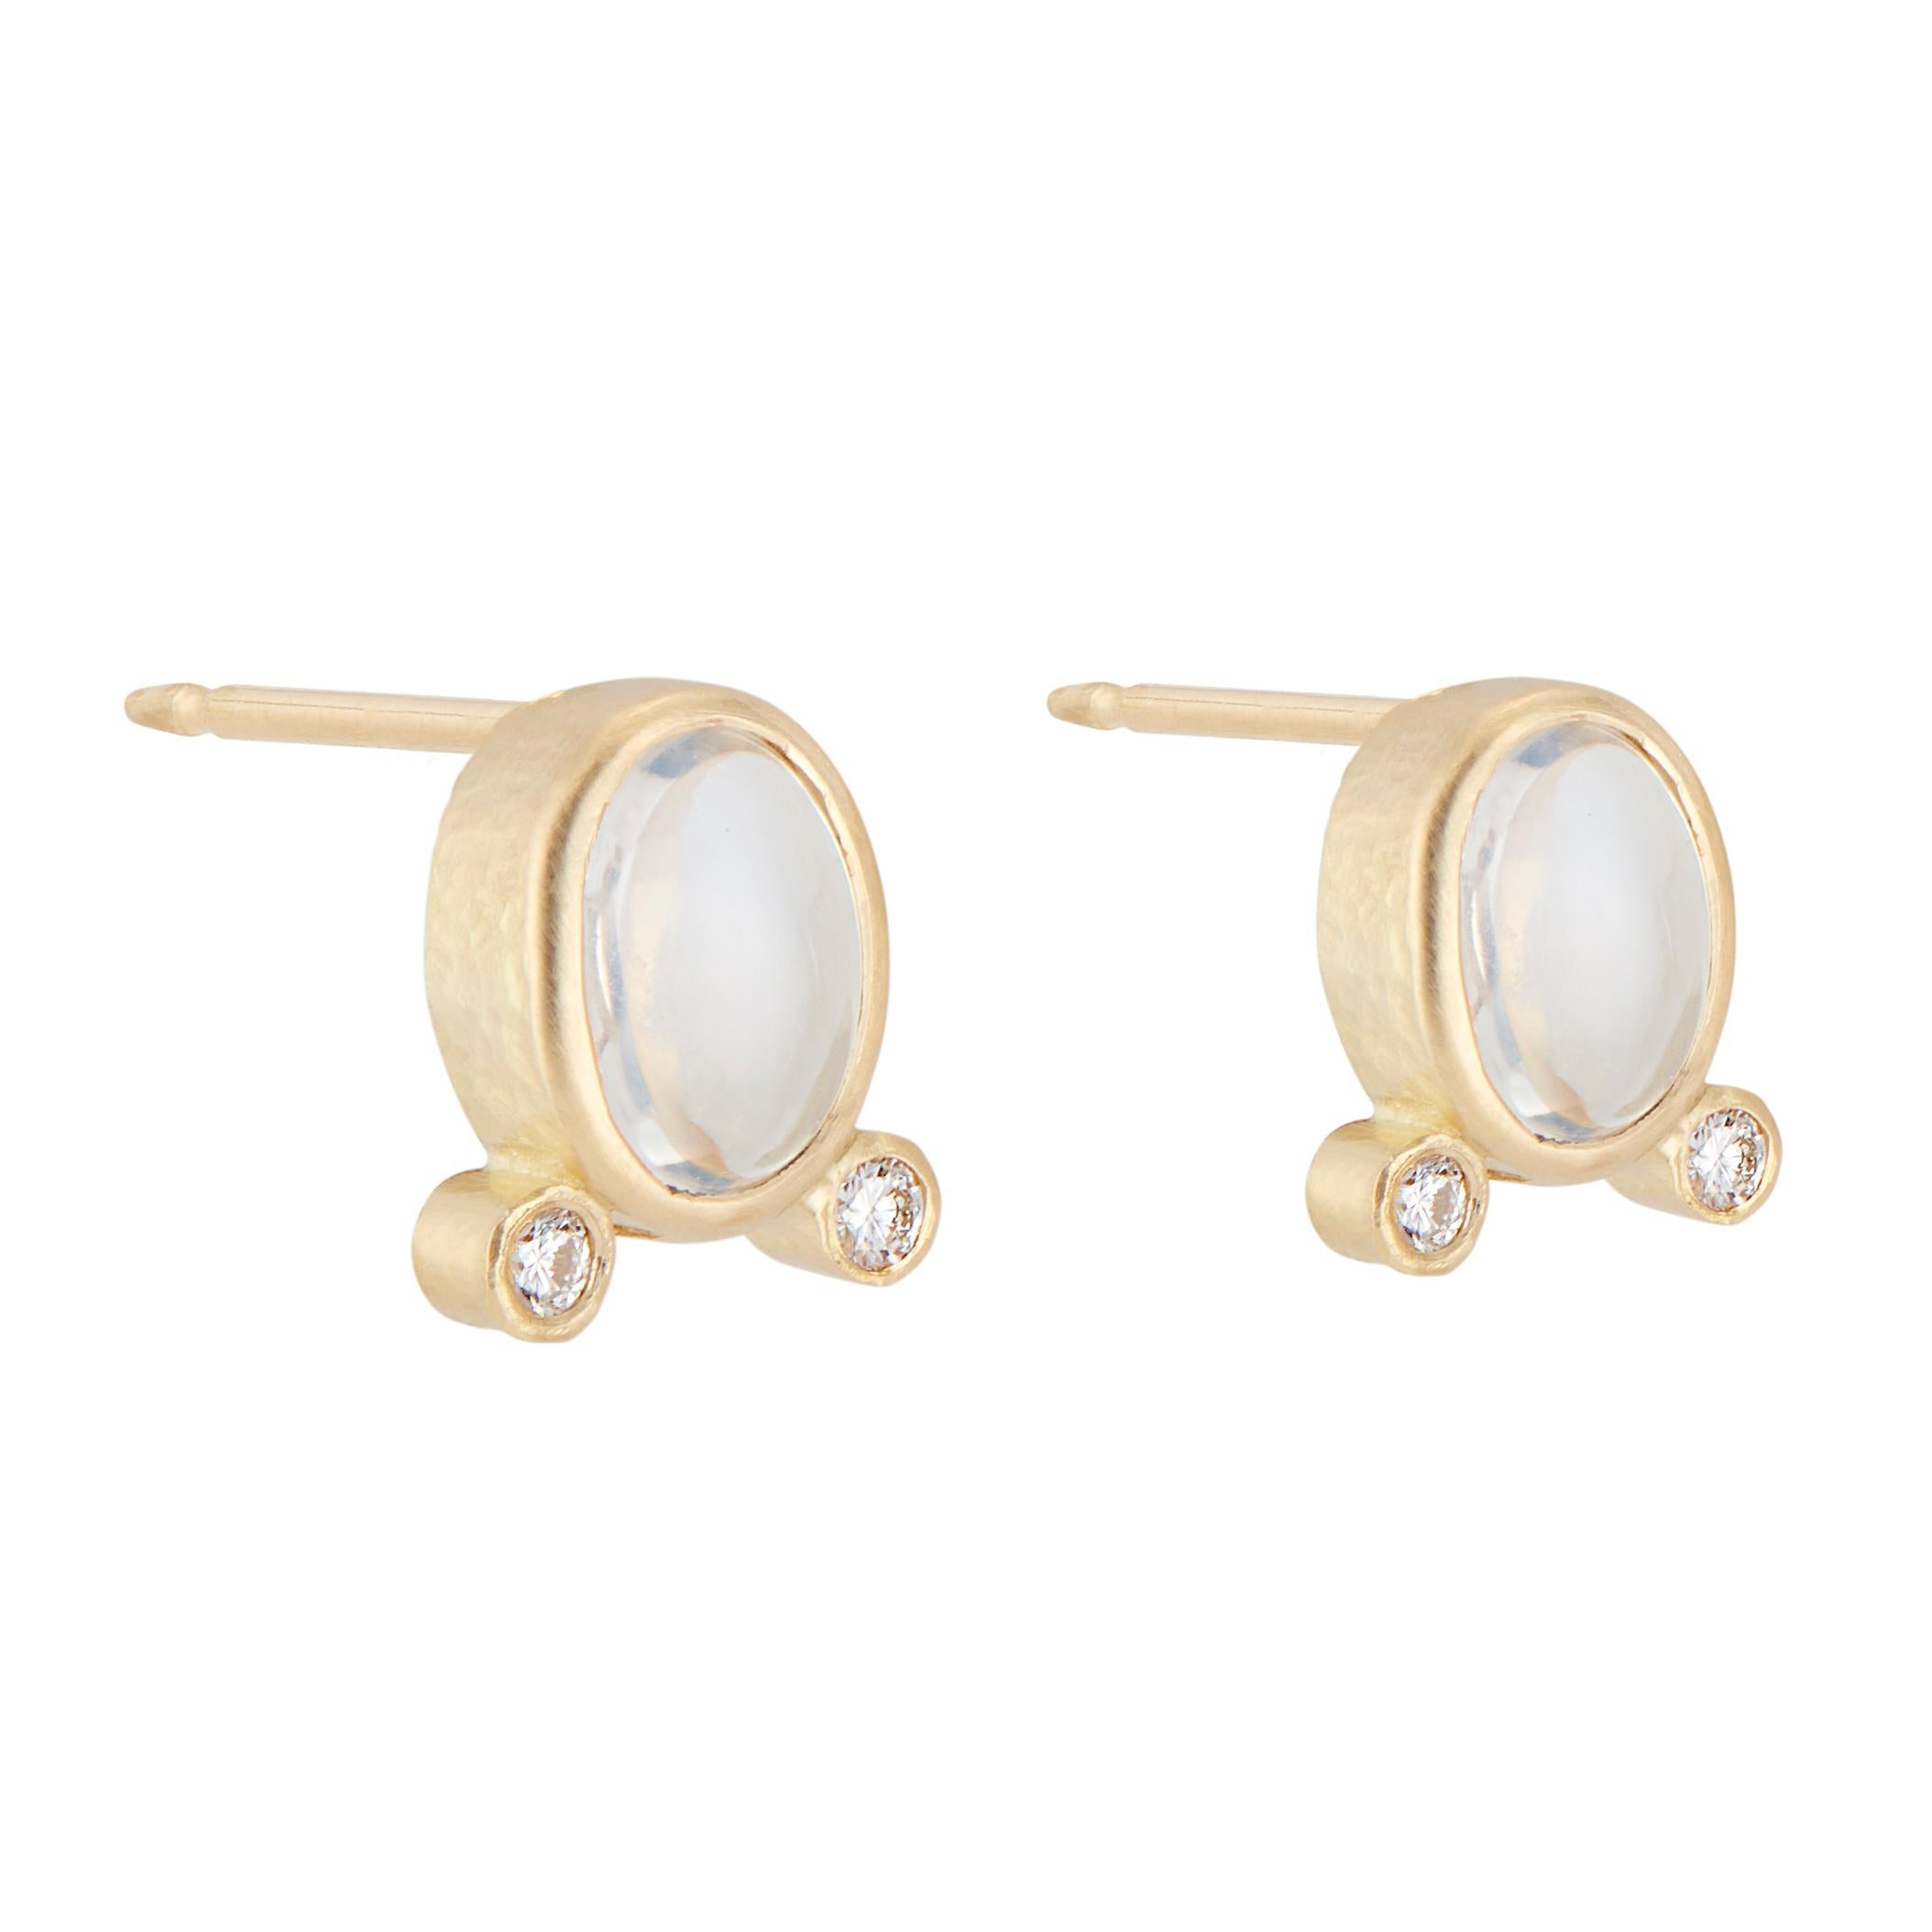 Moonstone and diamond earrings. 2 oval bezel set moonstones, each with 2 round brilliant cut accent diamonds, in 18k yellow gold textured settings.  

2 oval bluish white cabochon moonstones, approx. 1.73cts
4 round brilliant cut diamonds, G VS